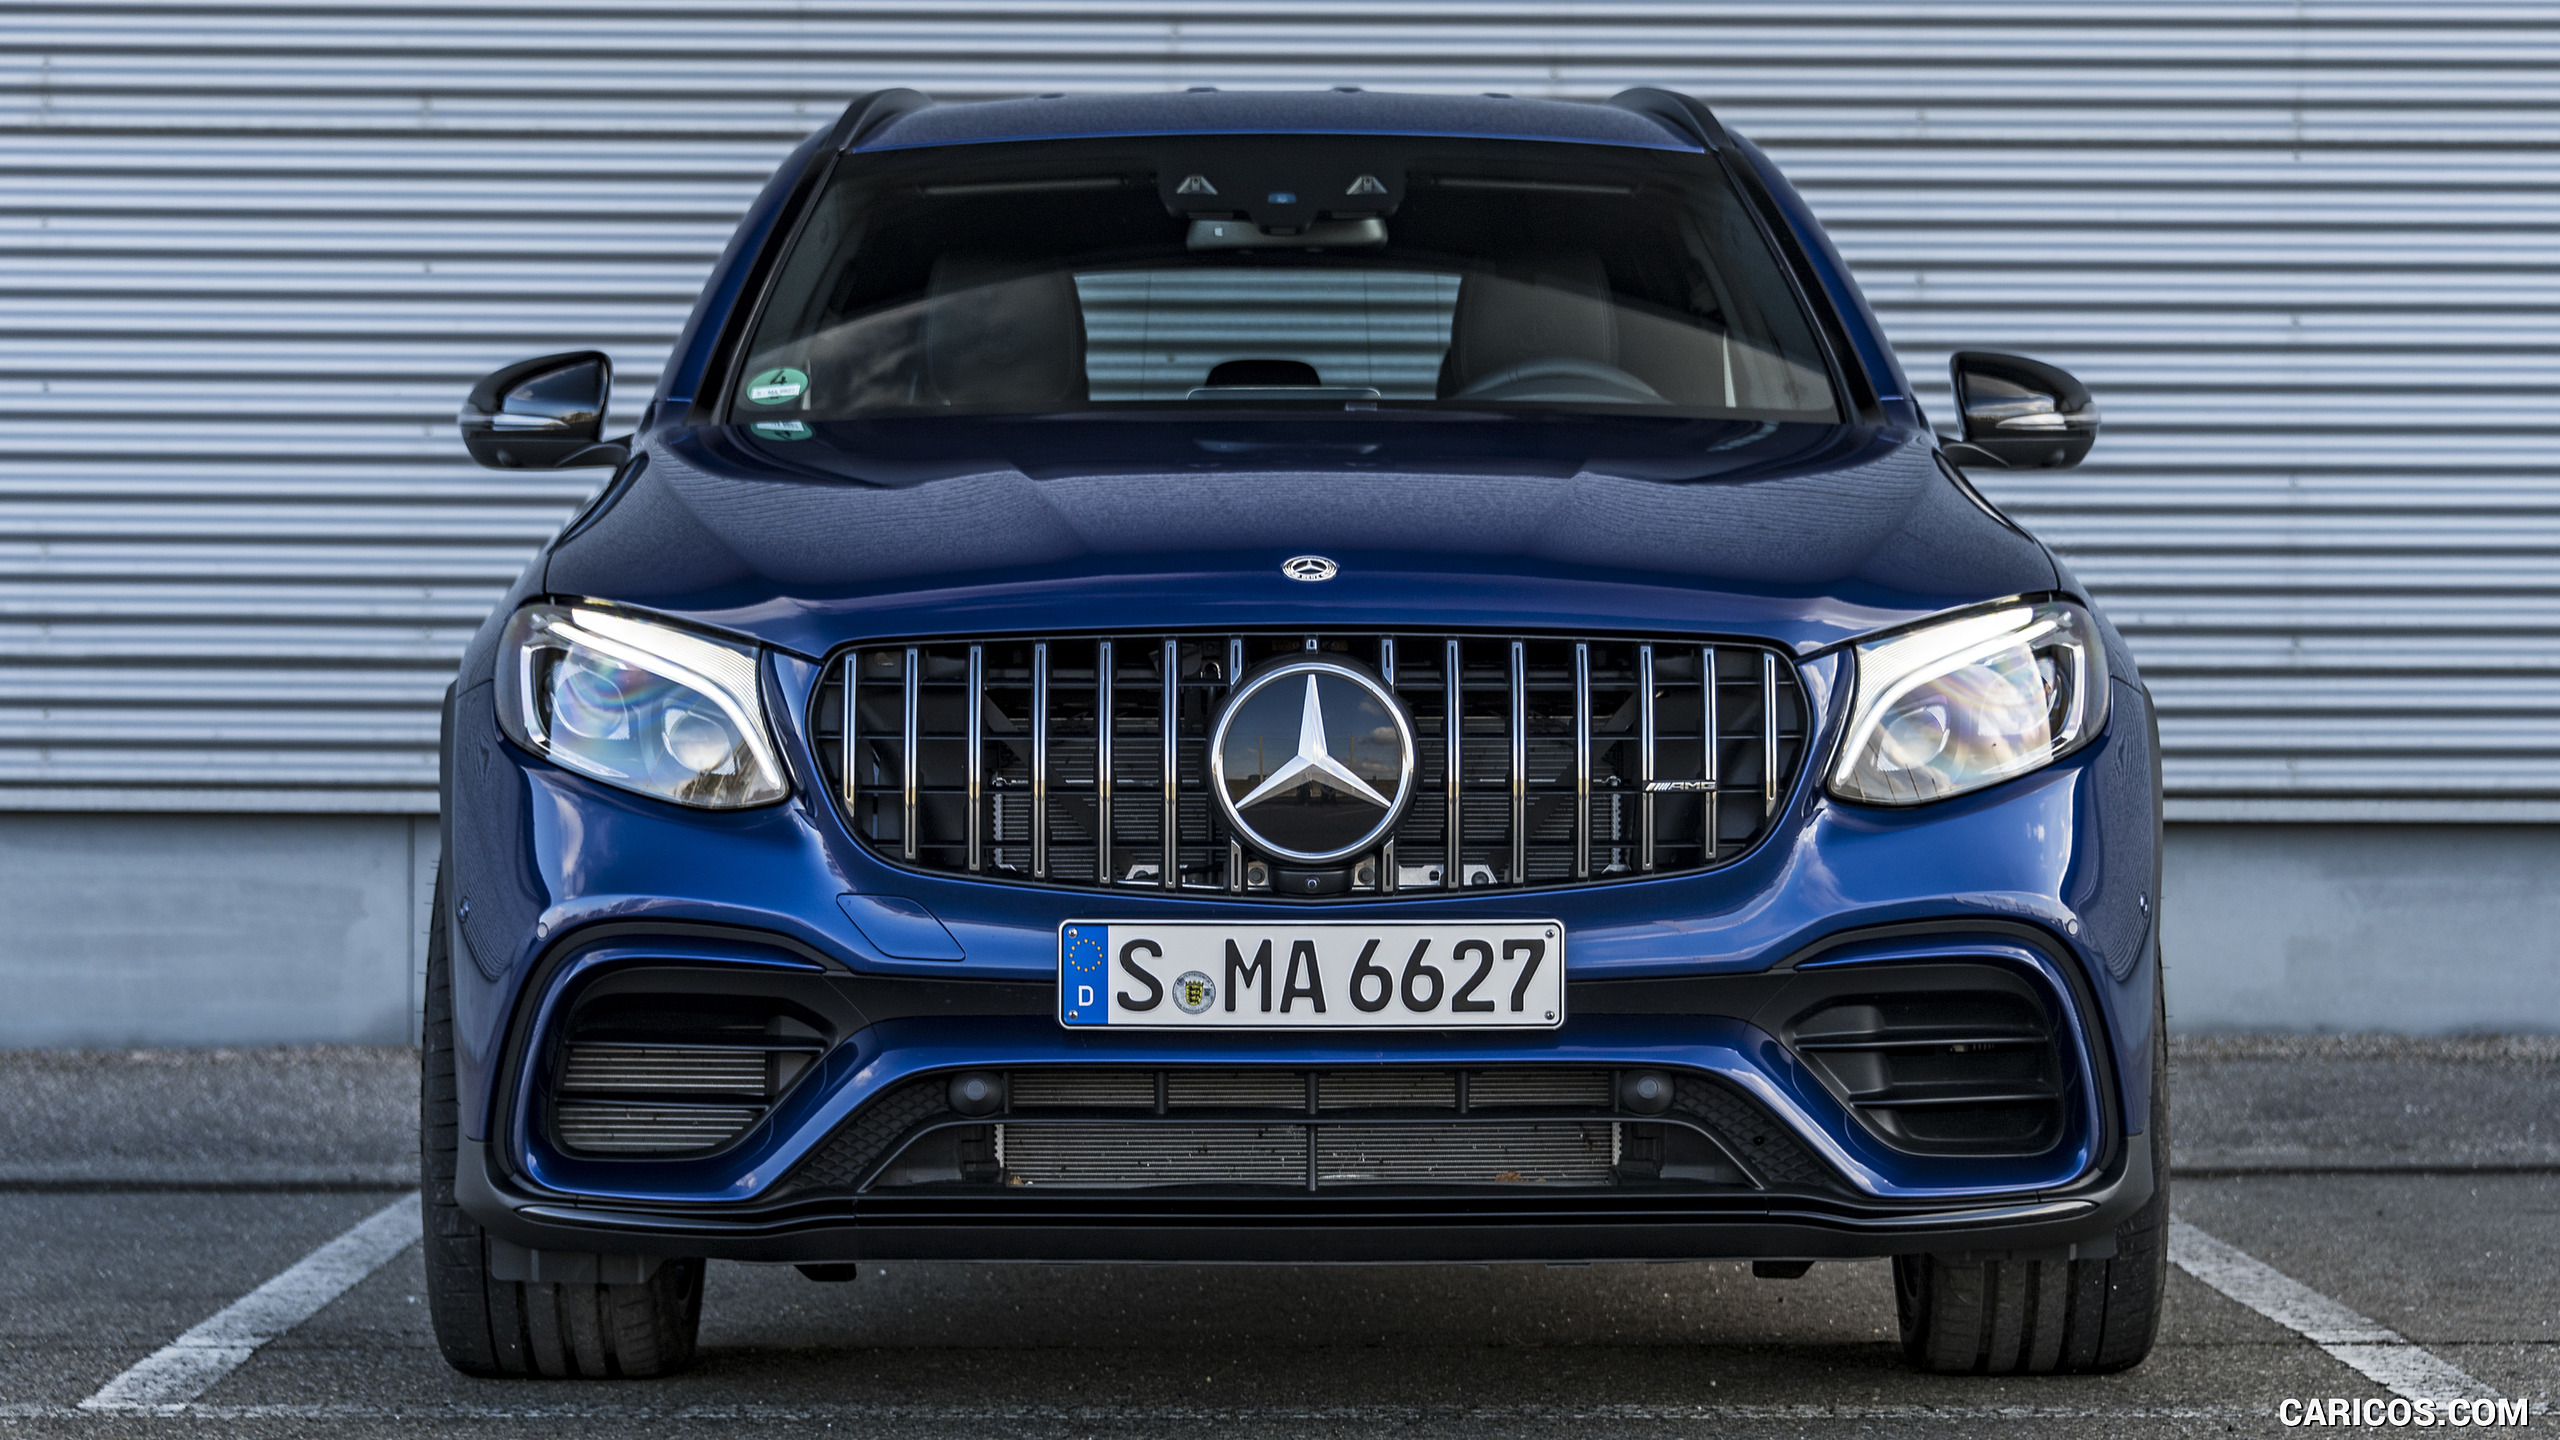 2018 Mercedes-AMG GLC 63 - Front, #70 of 115